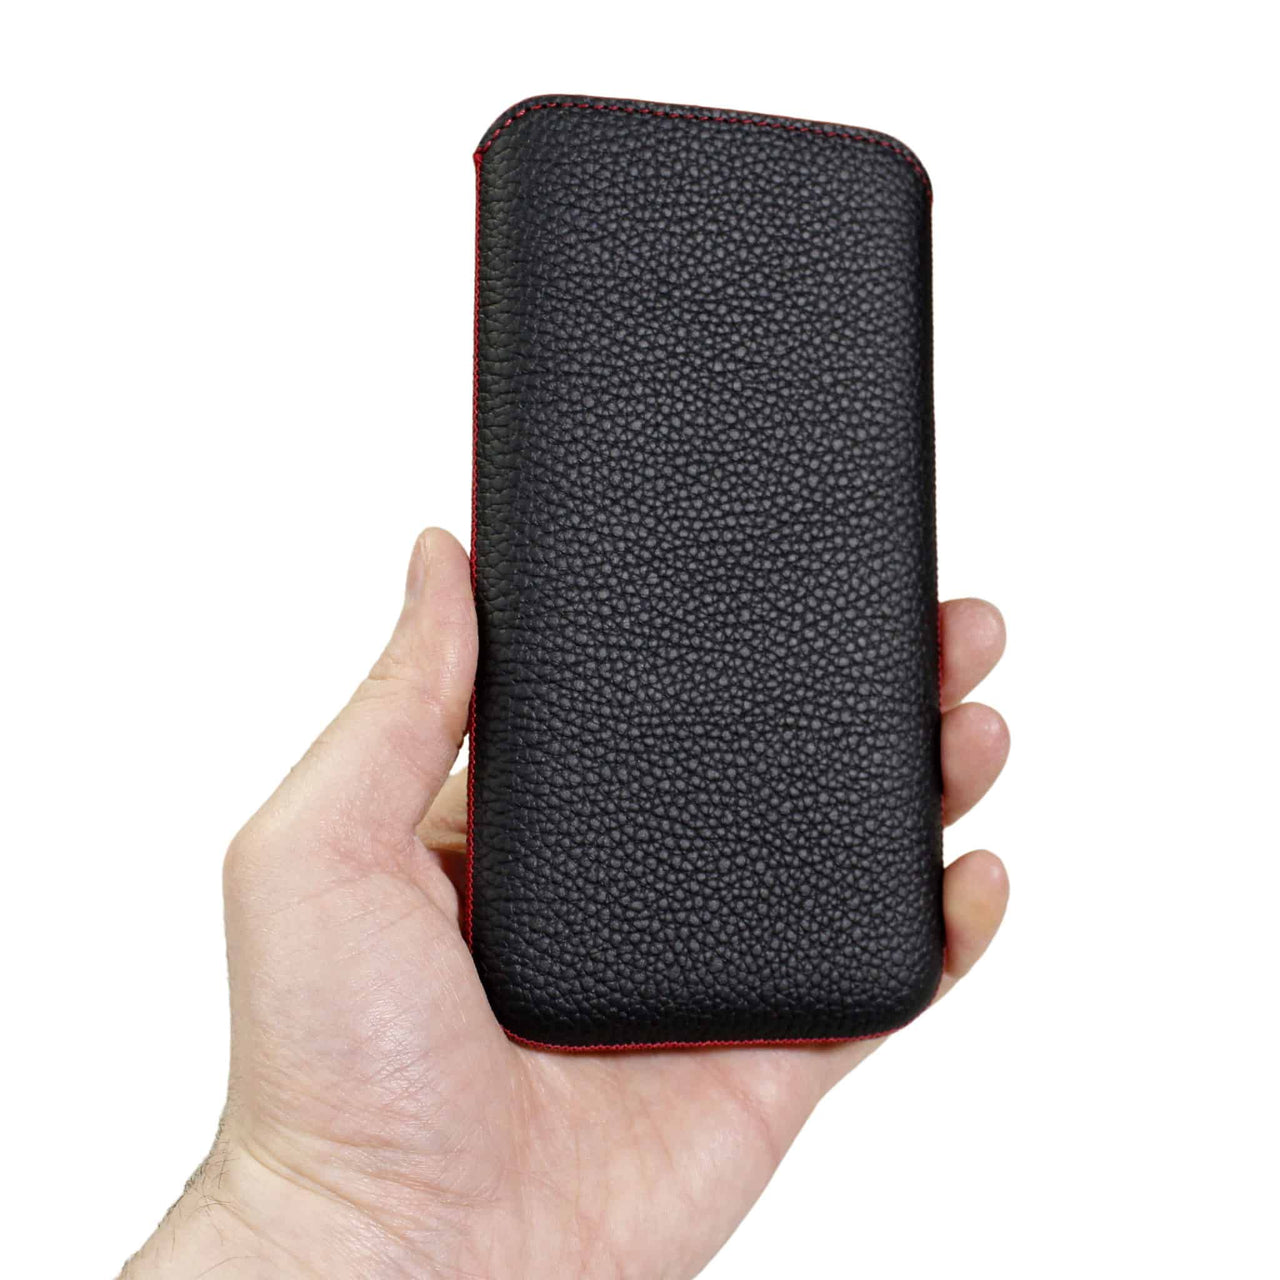 Samsung Galaxy S21 Plus Genuine Leather Pouch Sleeve Case | Artisanpouch